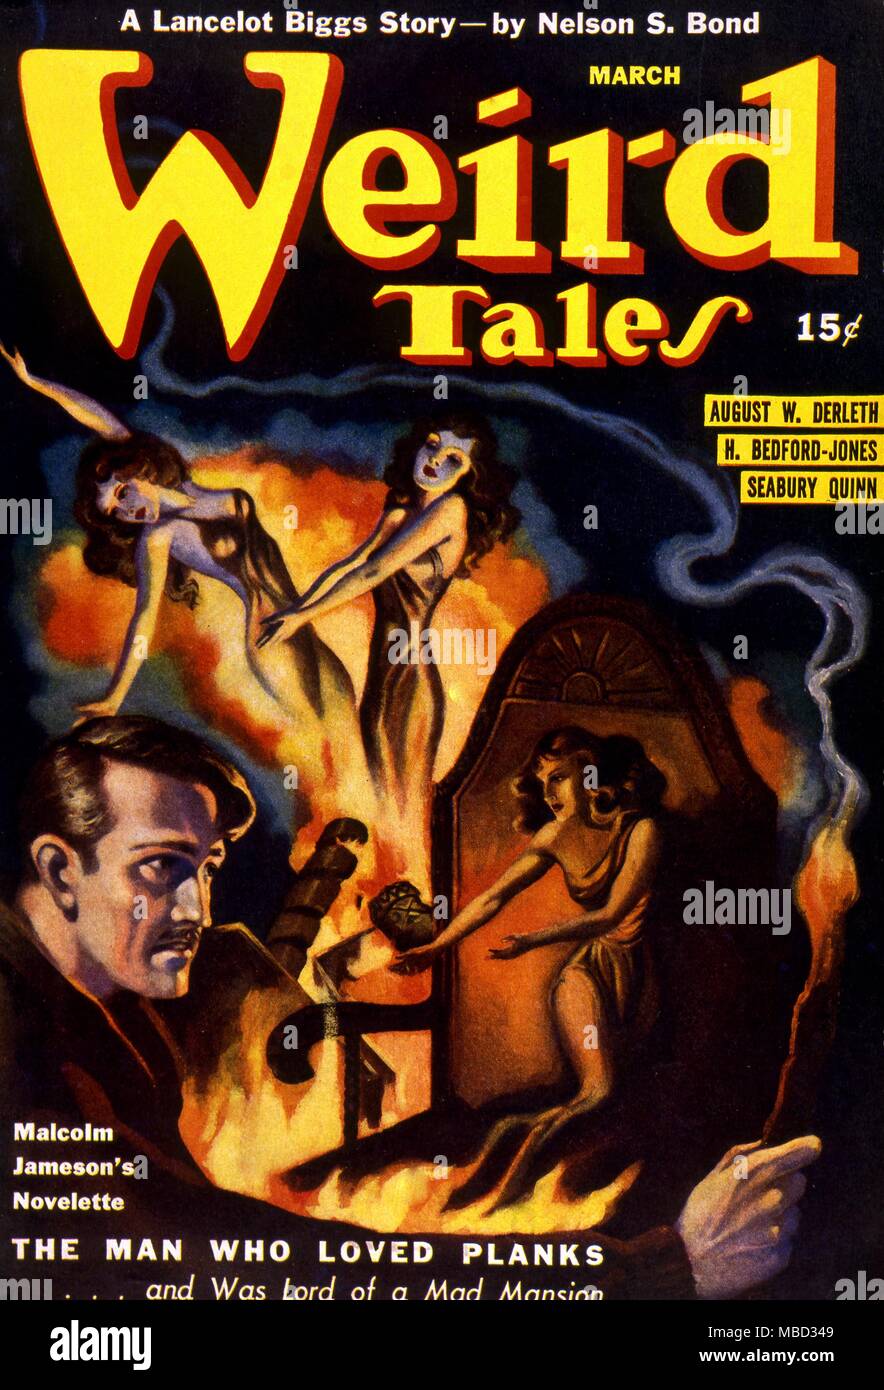 Science Fiction and Horror Magazines. 'Weird Tales' cover. March 1941. Artwork by Brundage Stock Photo